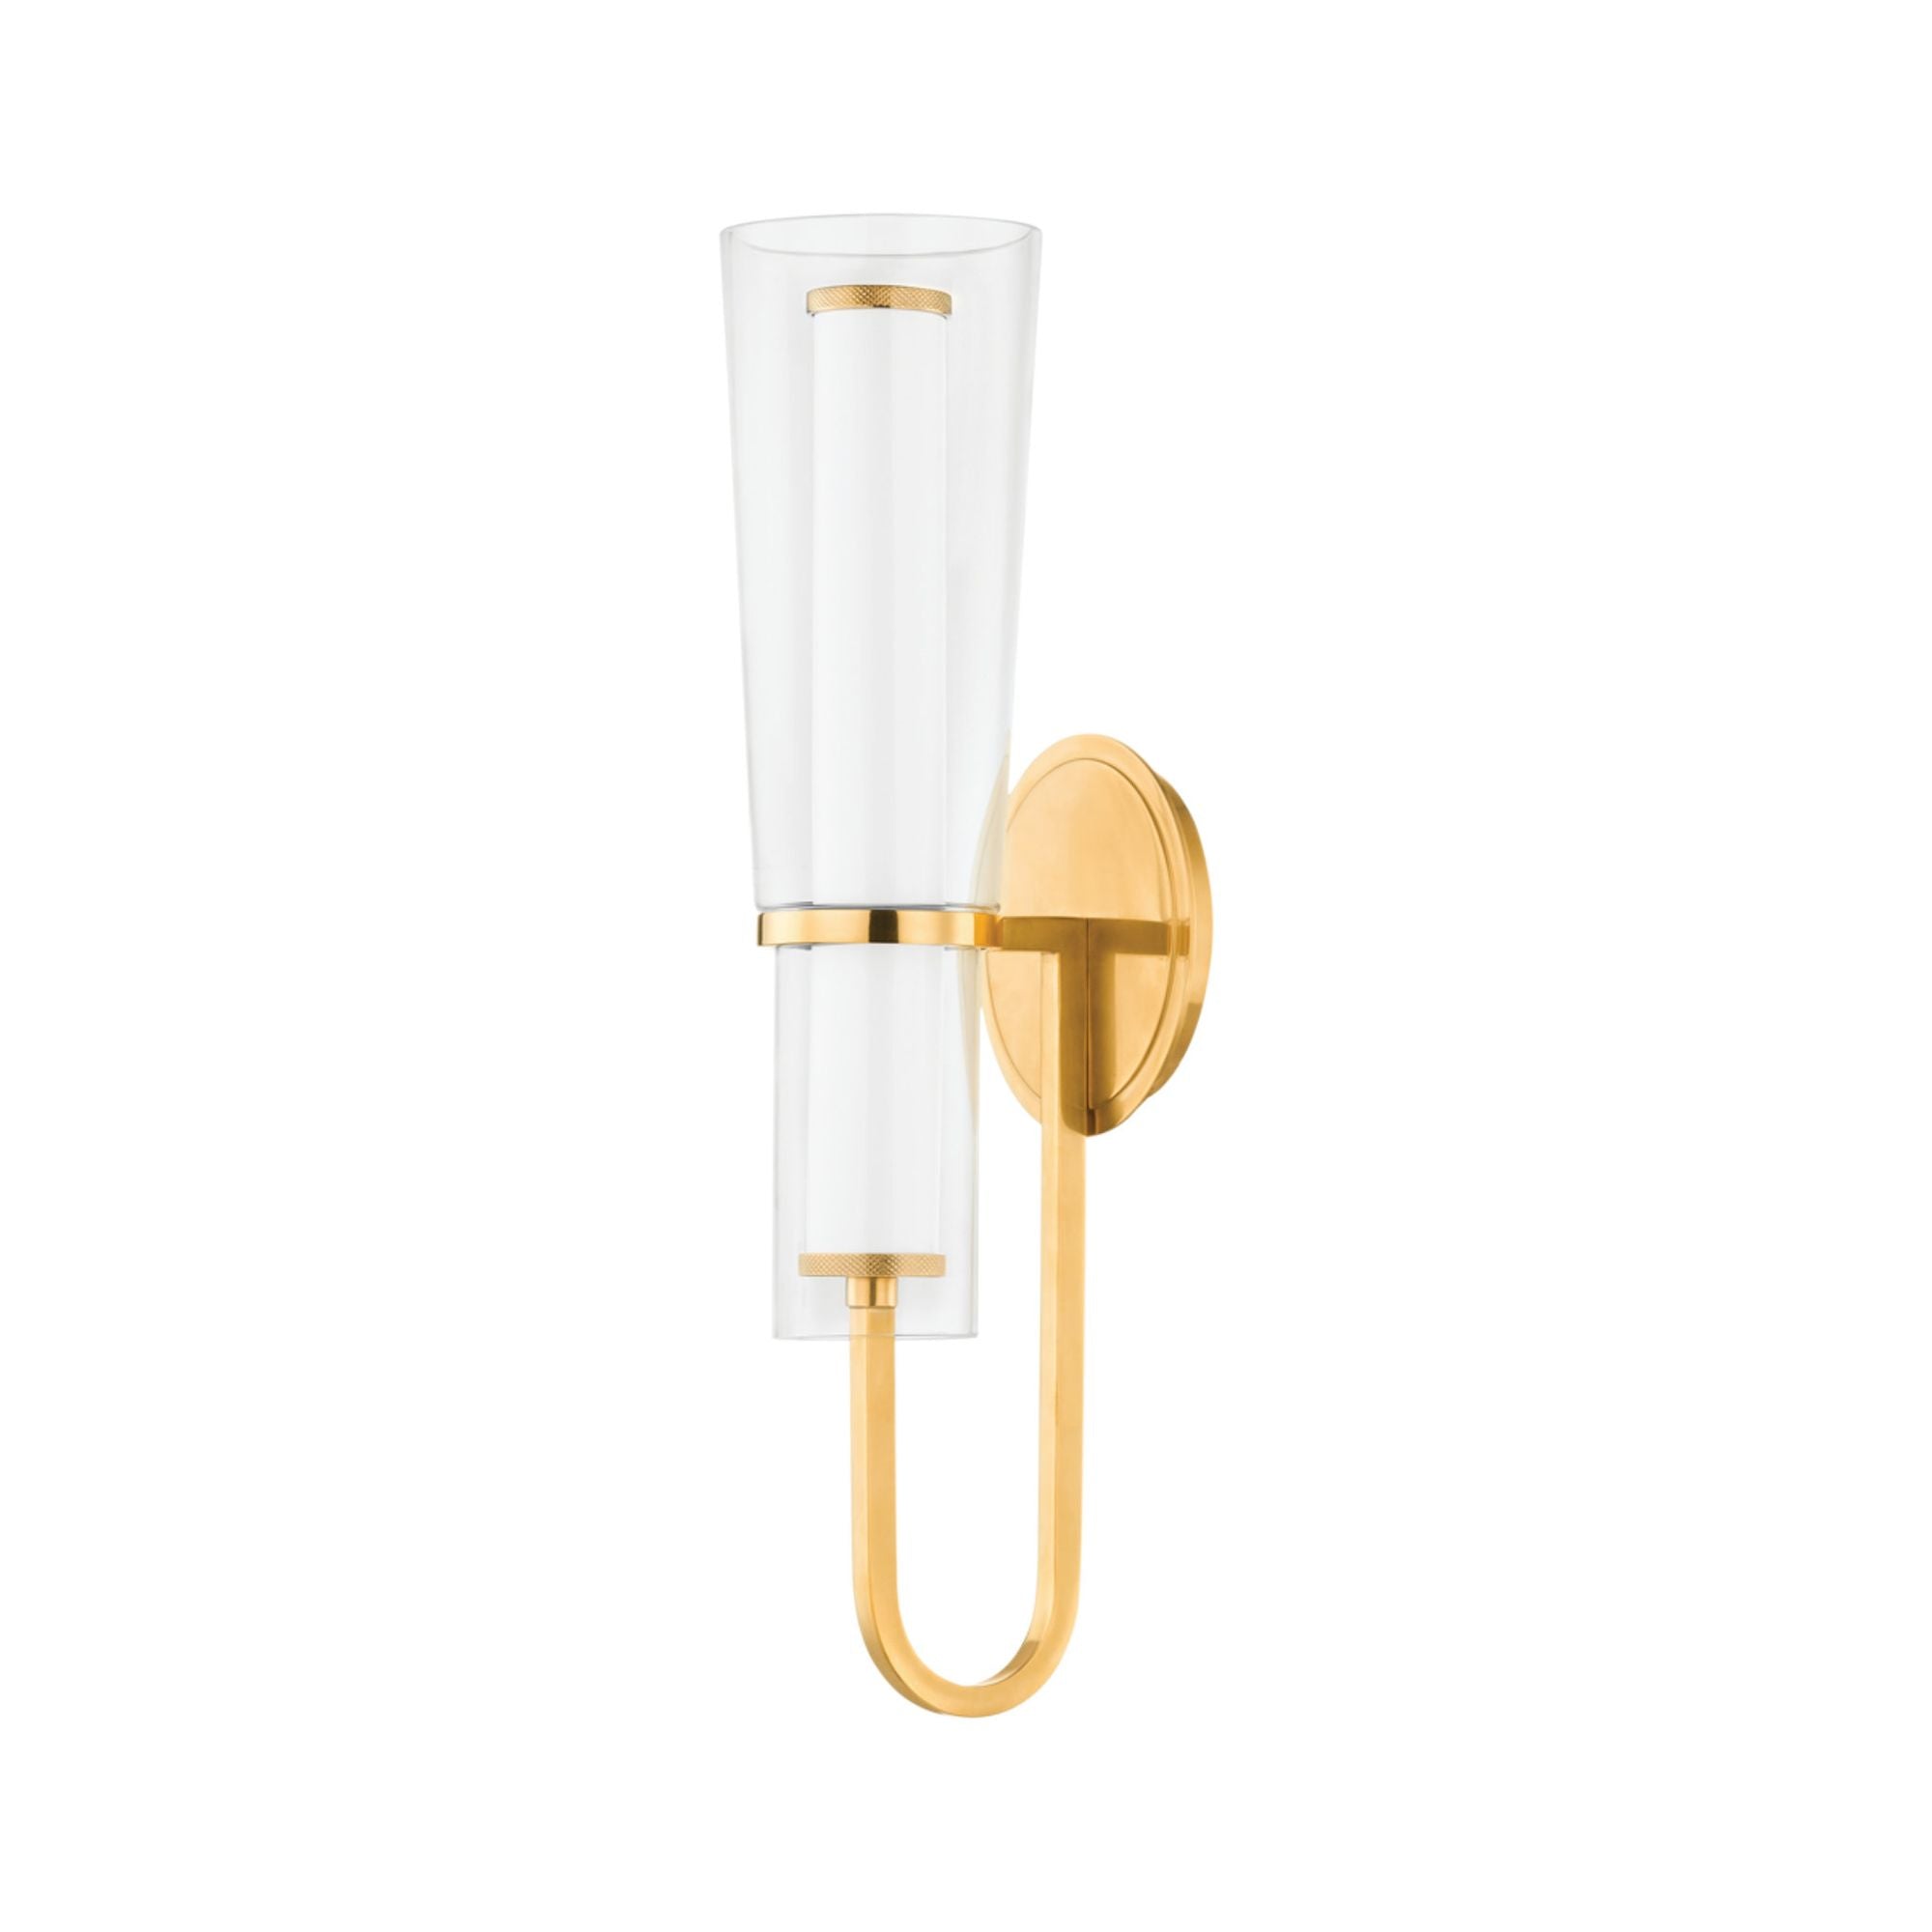 Vancouver 1 Light Wall Sconce in Aged Brass